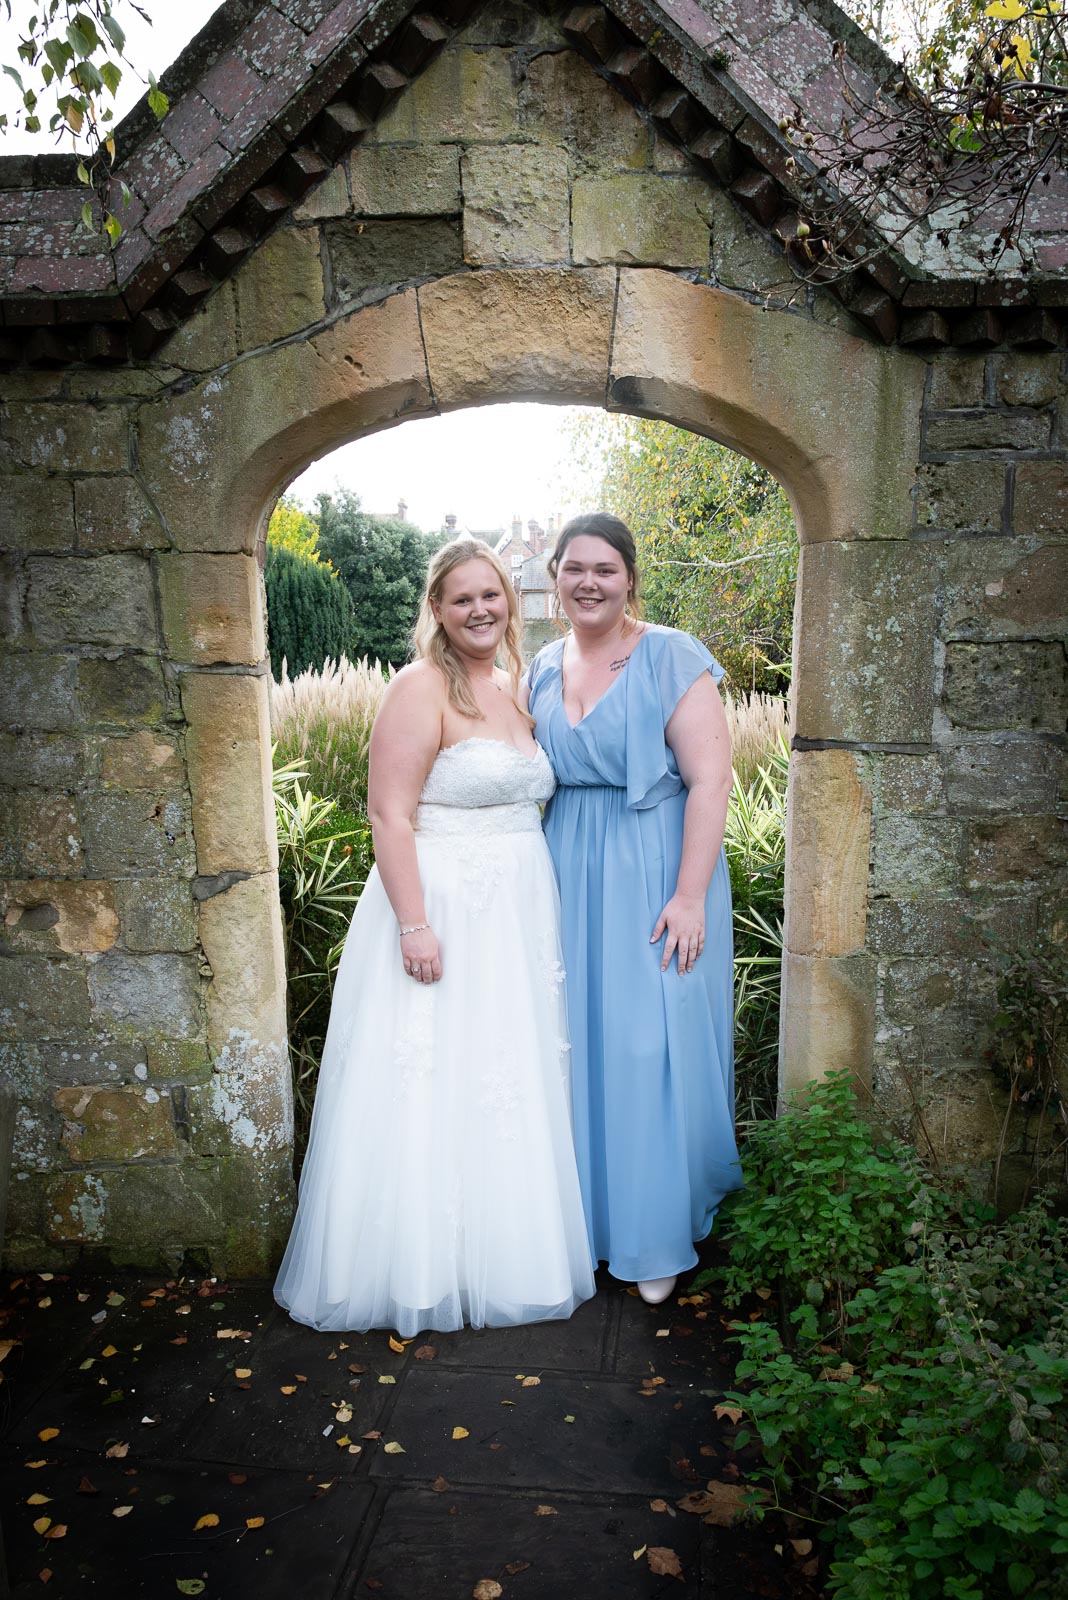 Eliana and her sister pose in one of the picturesque arches at Southover Grange after marrying Jacob.